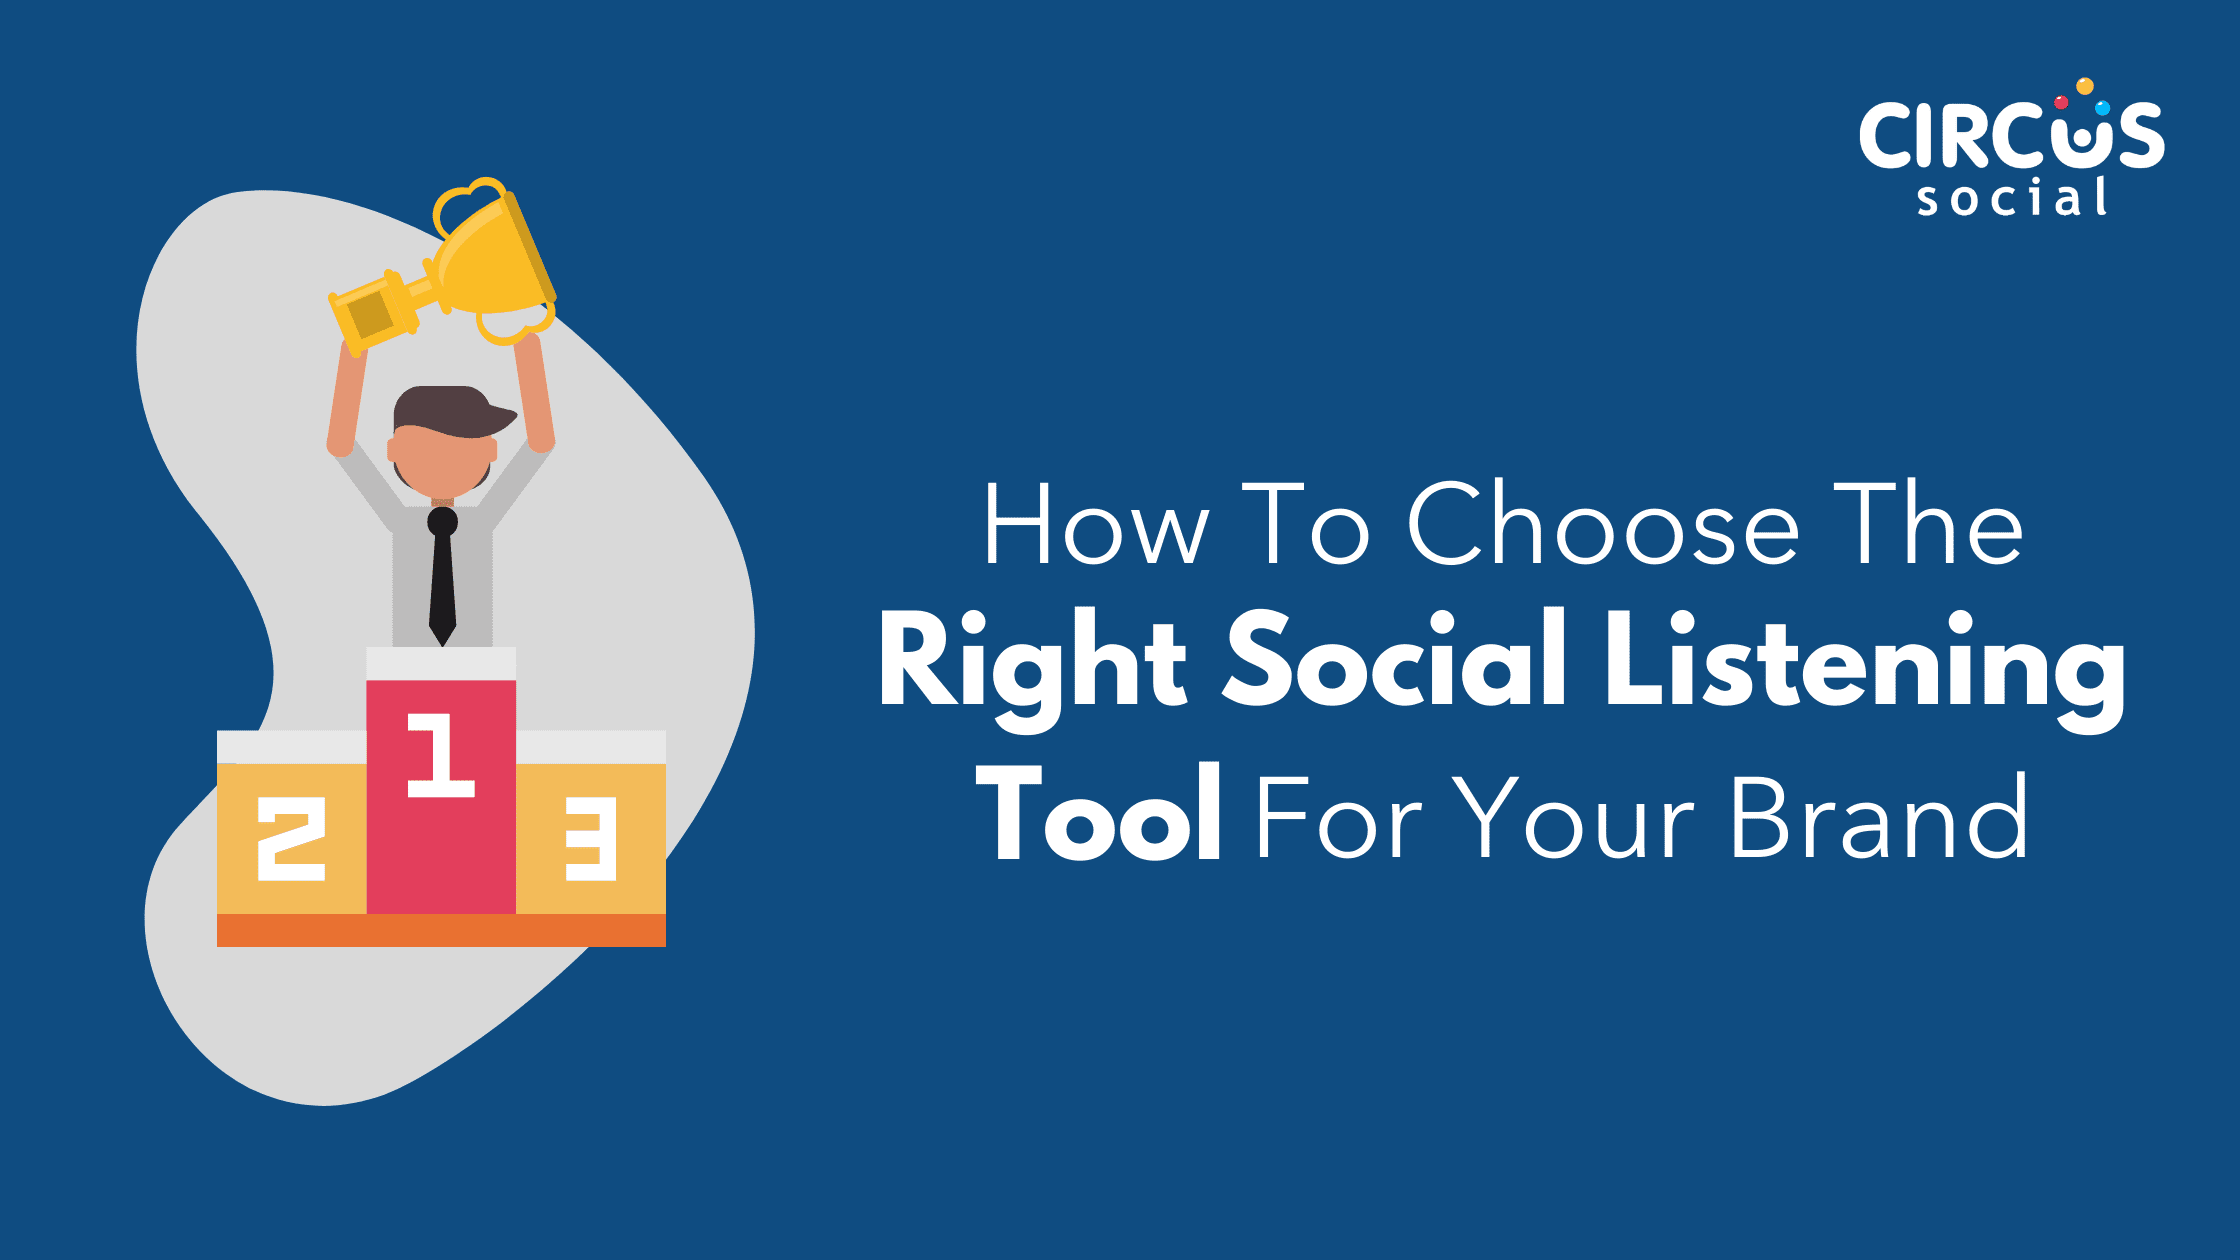 Blog Post: How To Choose The Right Social Listening Tool For Your Brand